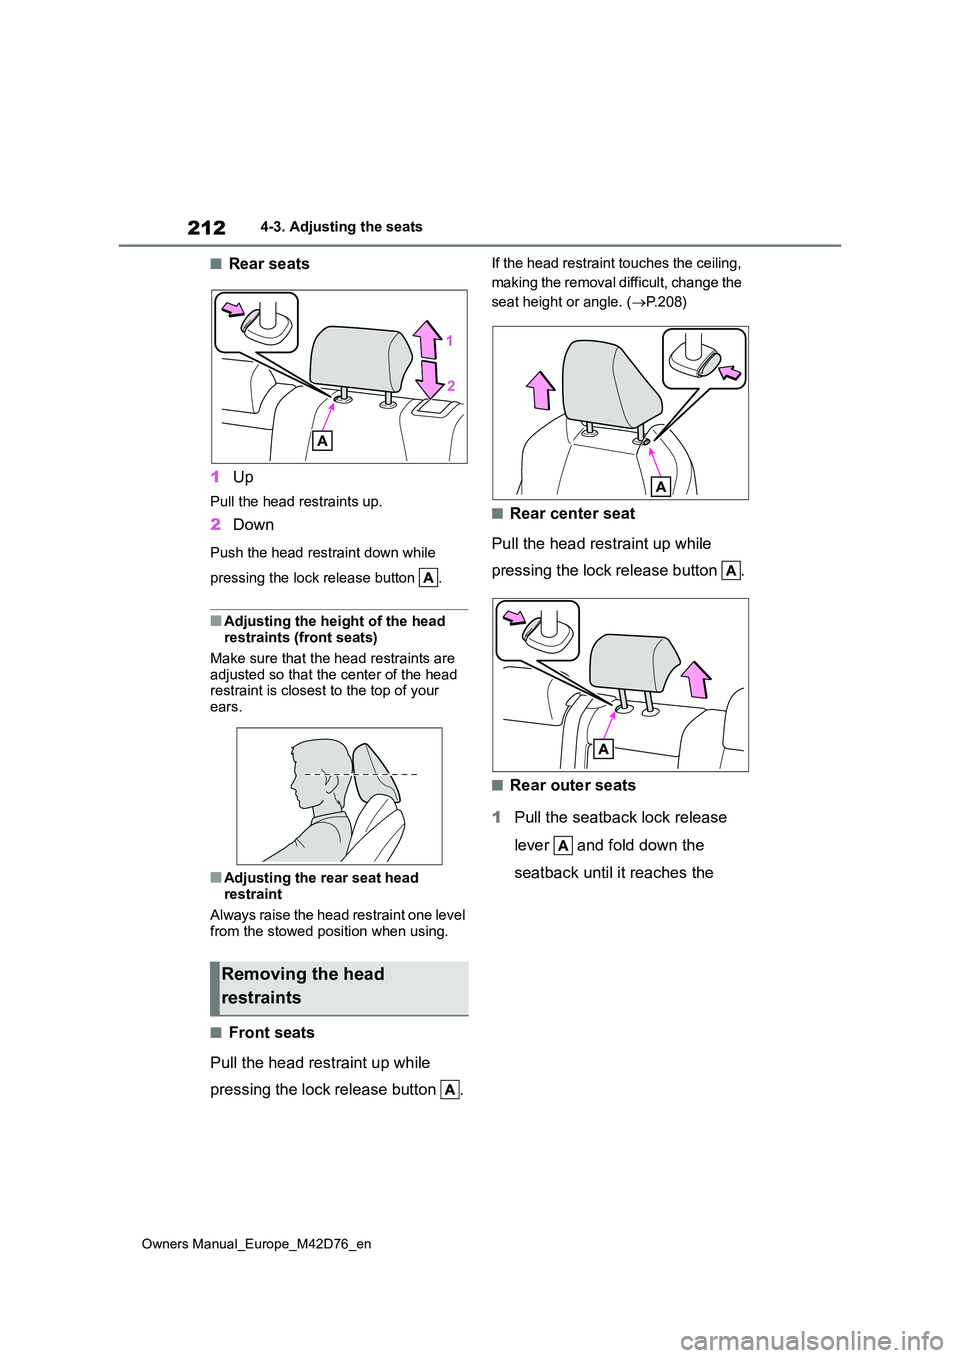 TOYOTA BZ4X 2022  Owners Manual (in English) 212
Owners Manual_Europe_M42D76_en
4-3. Adjusting the seats
■Rear seats 
1 Up
Pull the head restraints up.
2Down
Push the head restraint down while  
pressing the lock release button  .
■Adjusting